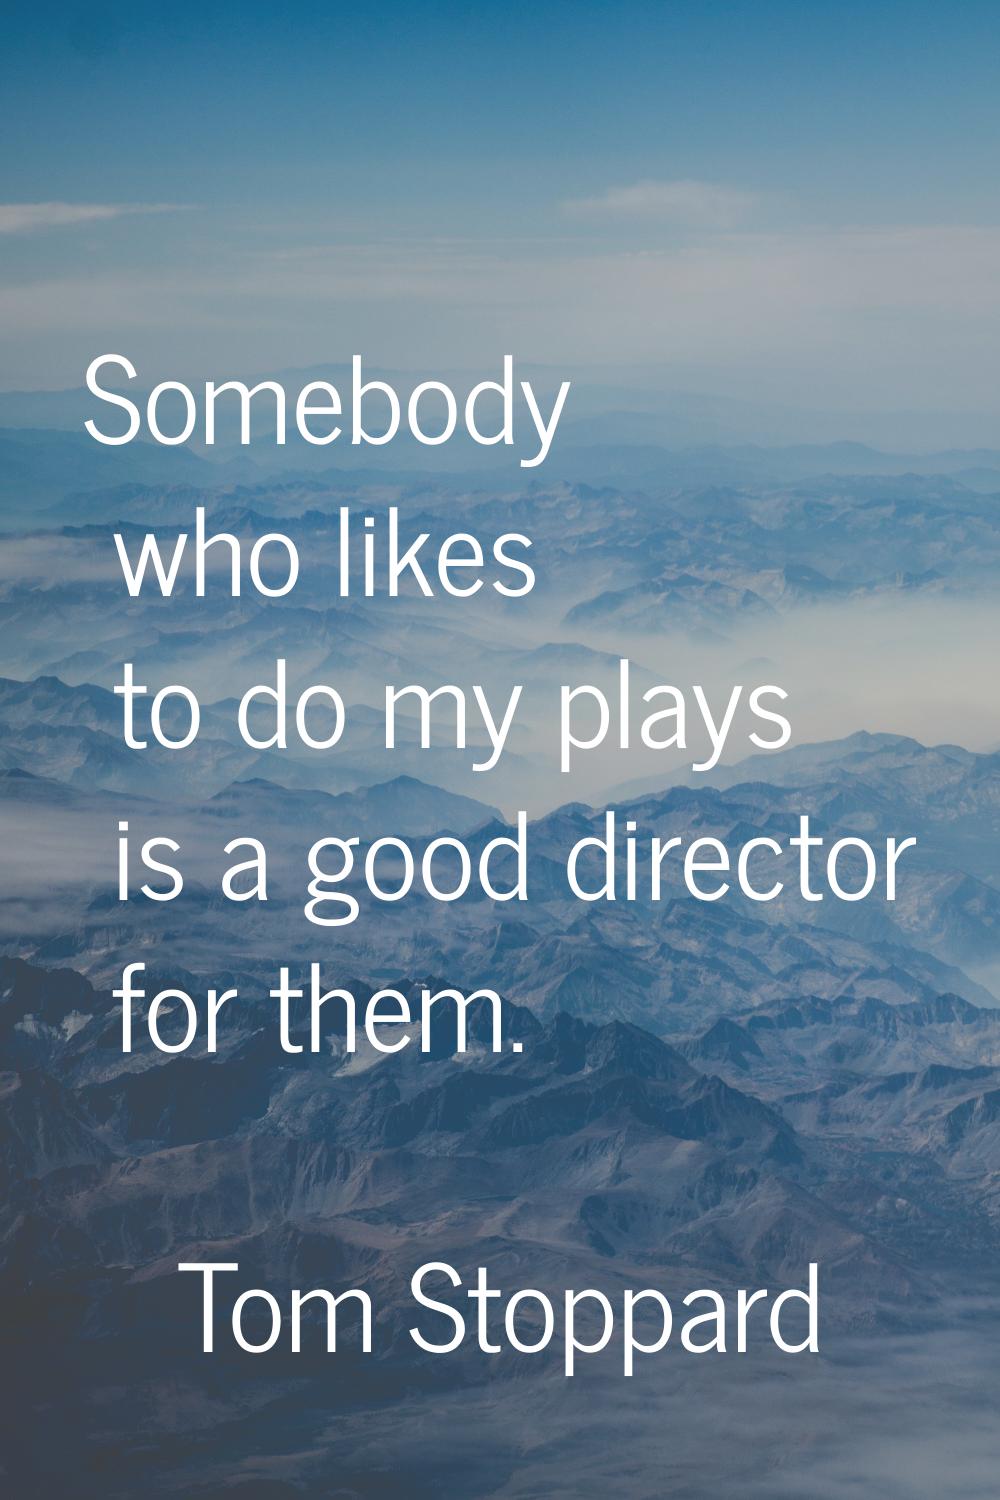 Somebody who likes to do my plays is a good director for them.